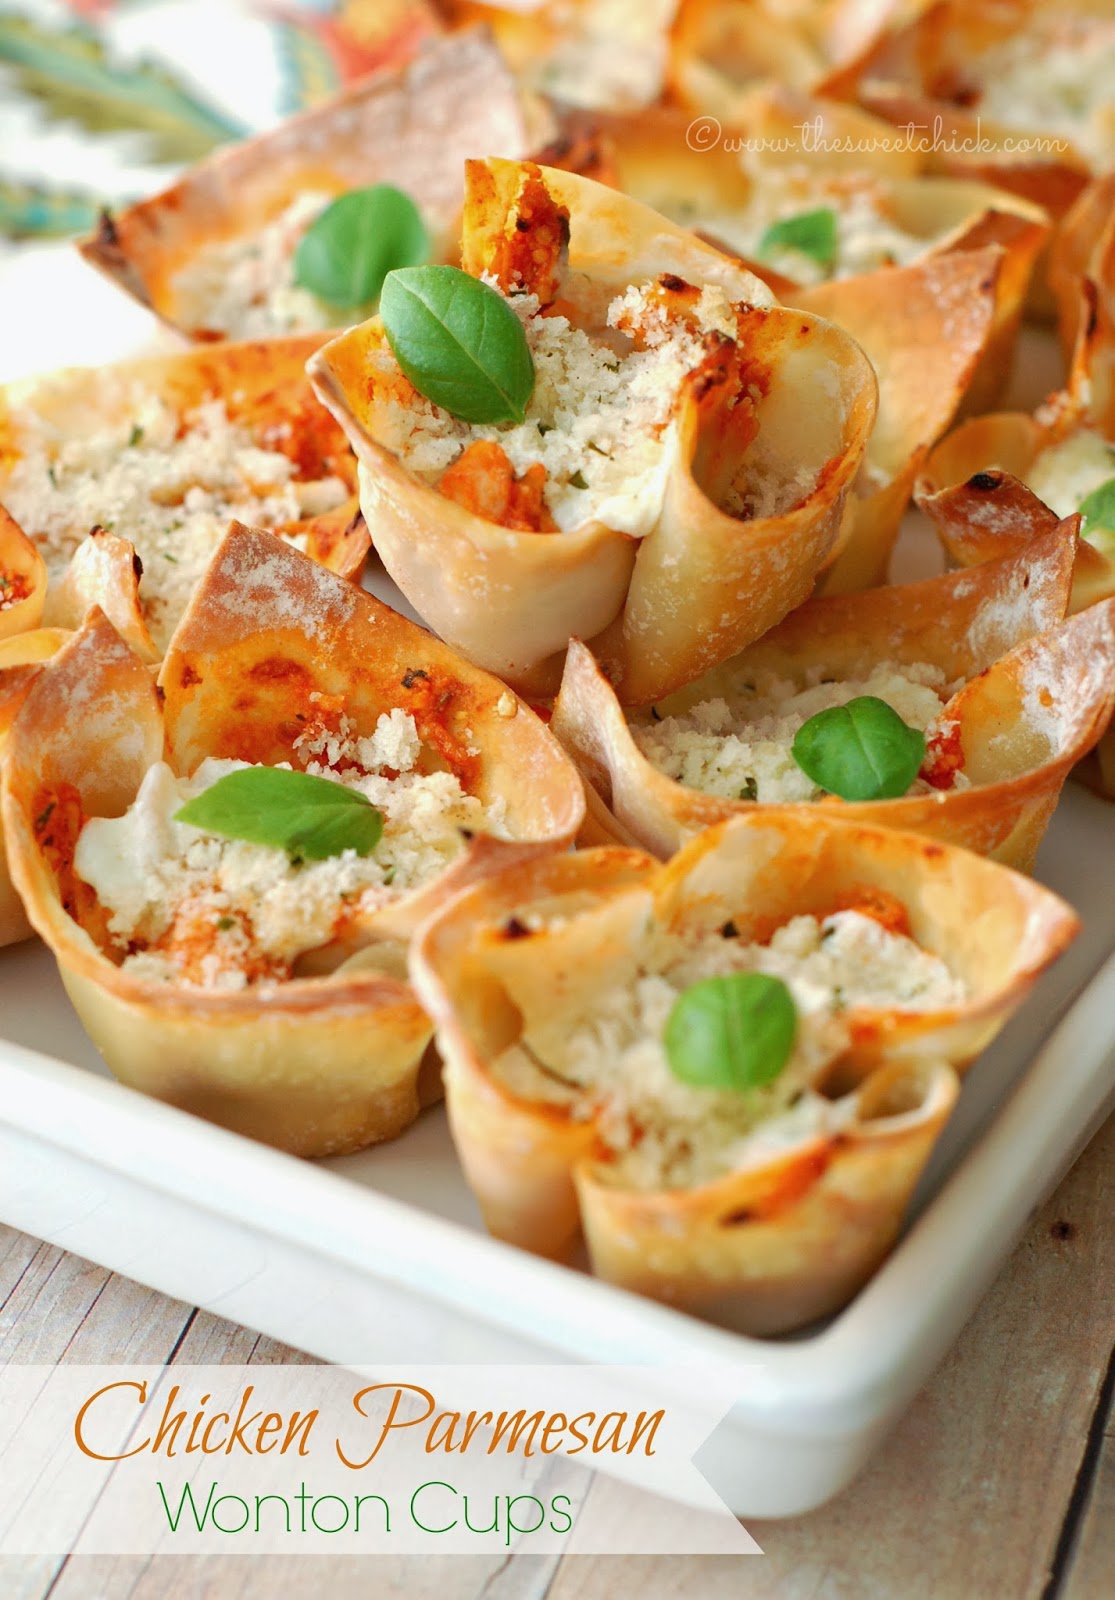 Chicken Parmesan Wonton Cups @www.thesweetchick.com